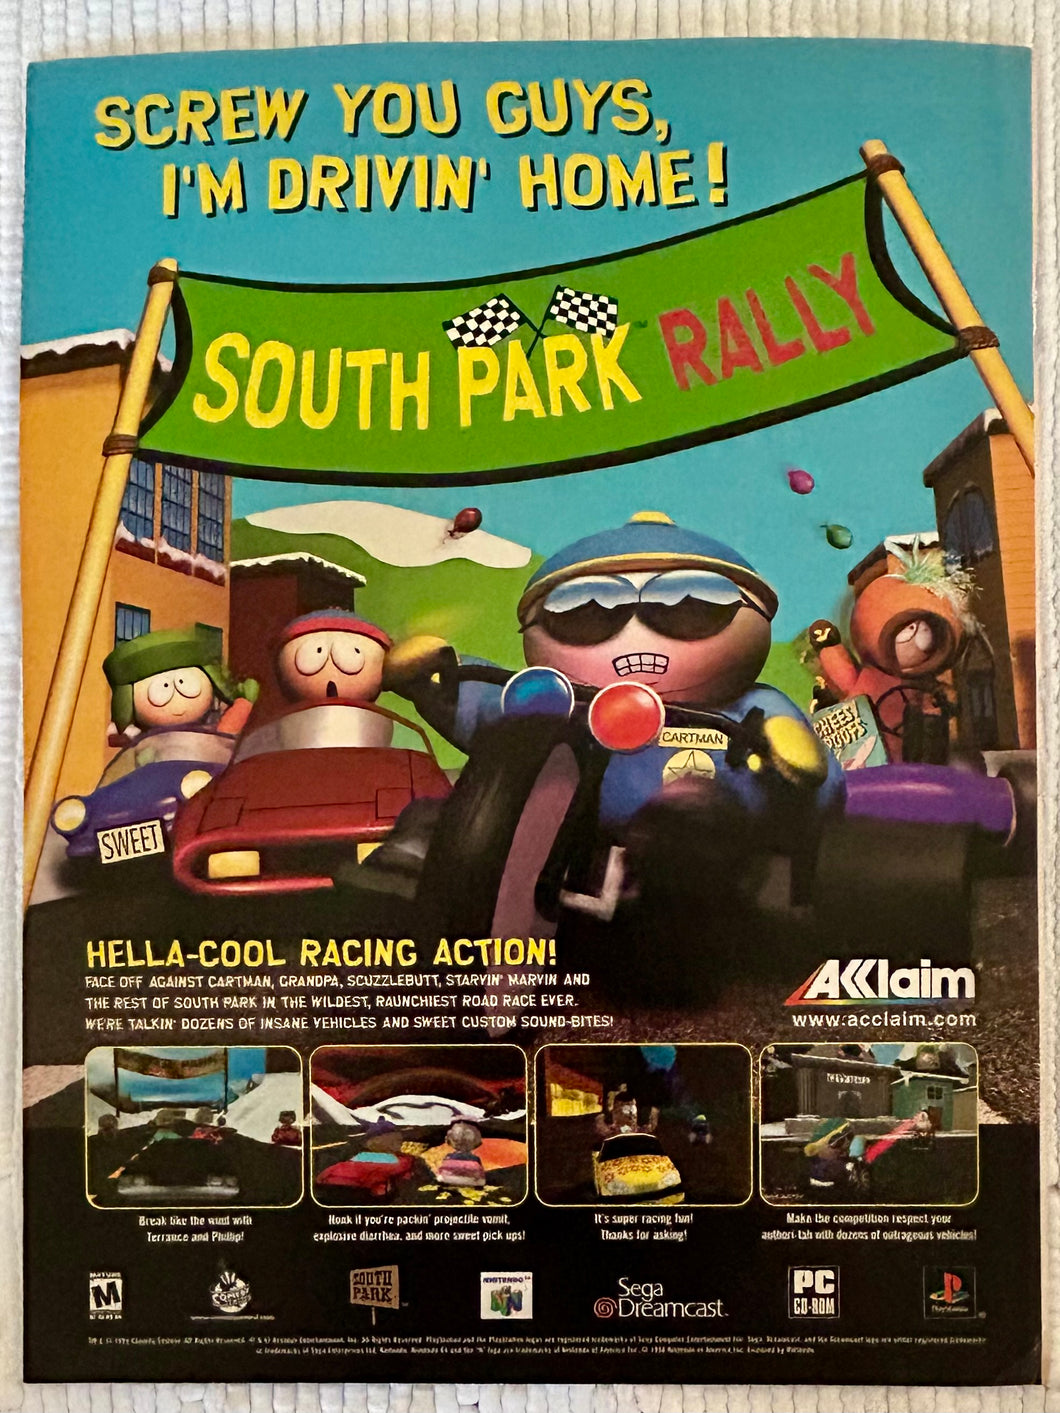 South Park Rally - Dreamcast N64 PS1 - Original Vintage Advertisement - Print Ads - Laminated A3 Poster